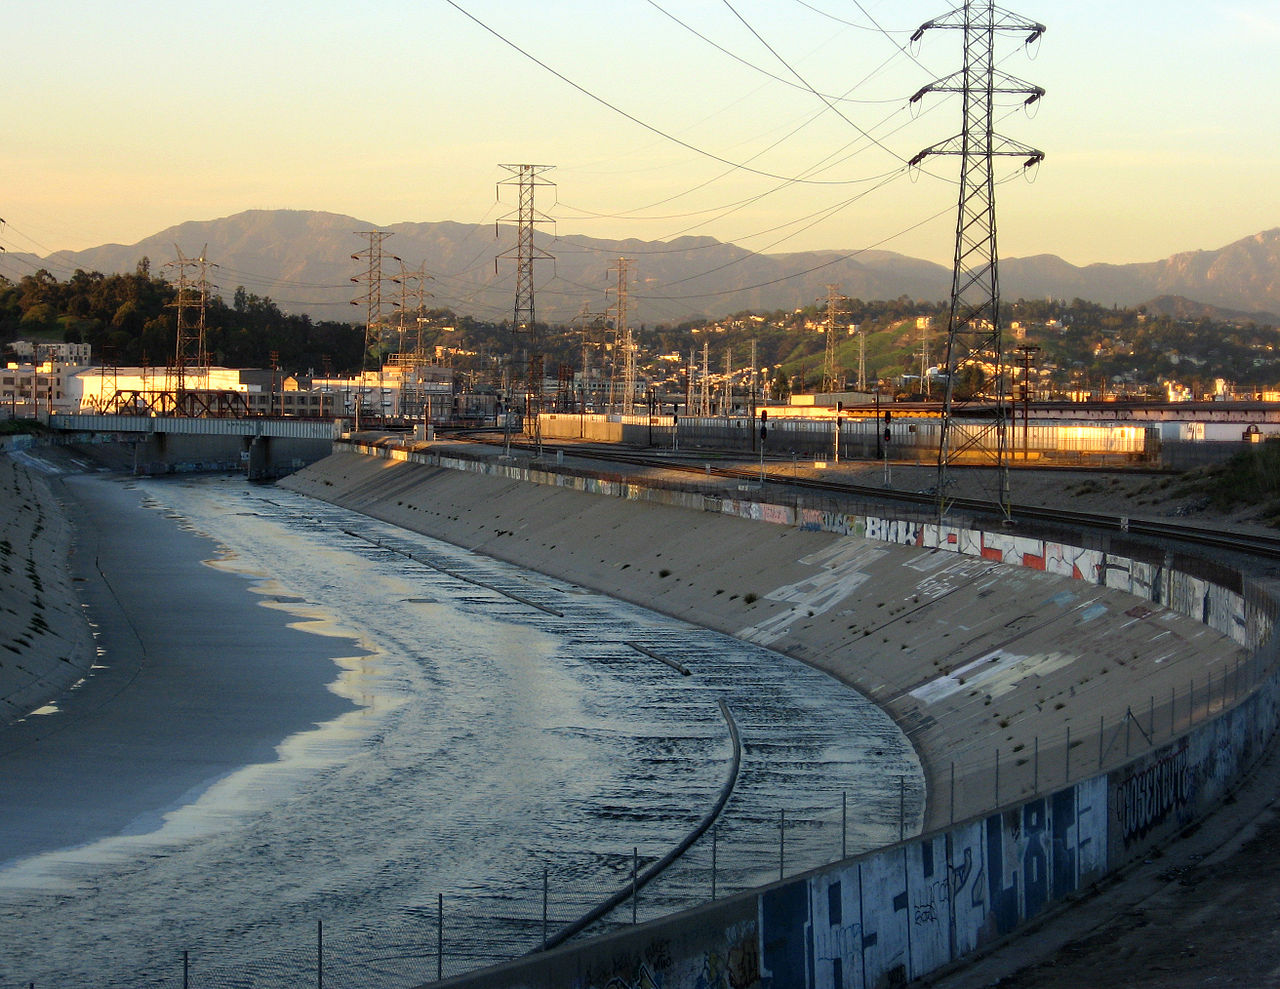 The Los Angeles River is extensively channelized with concrete embankments.